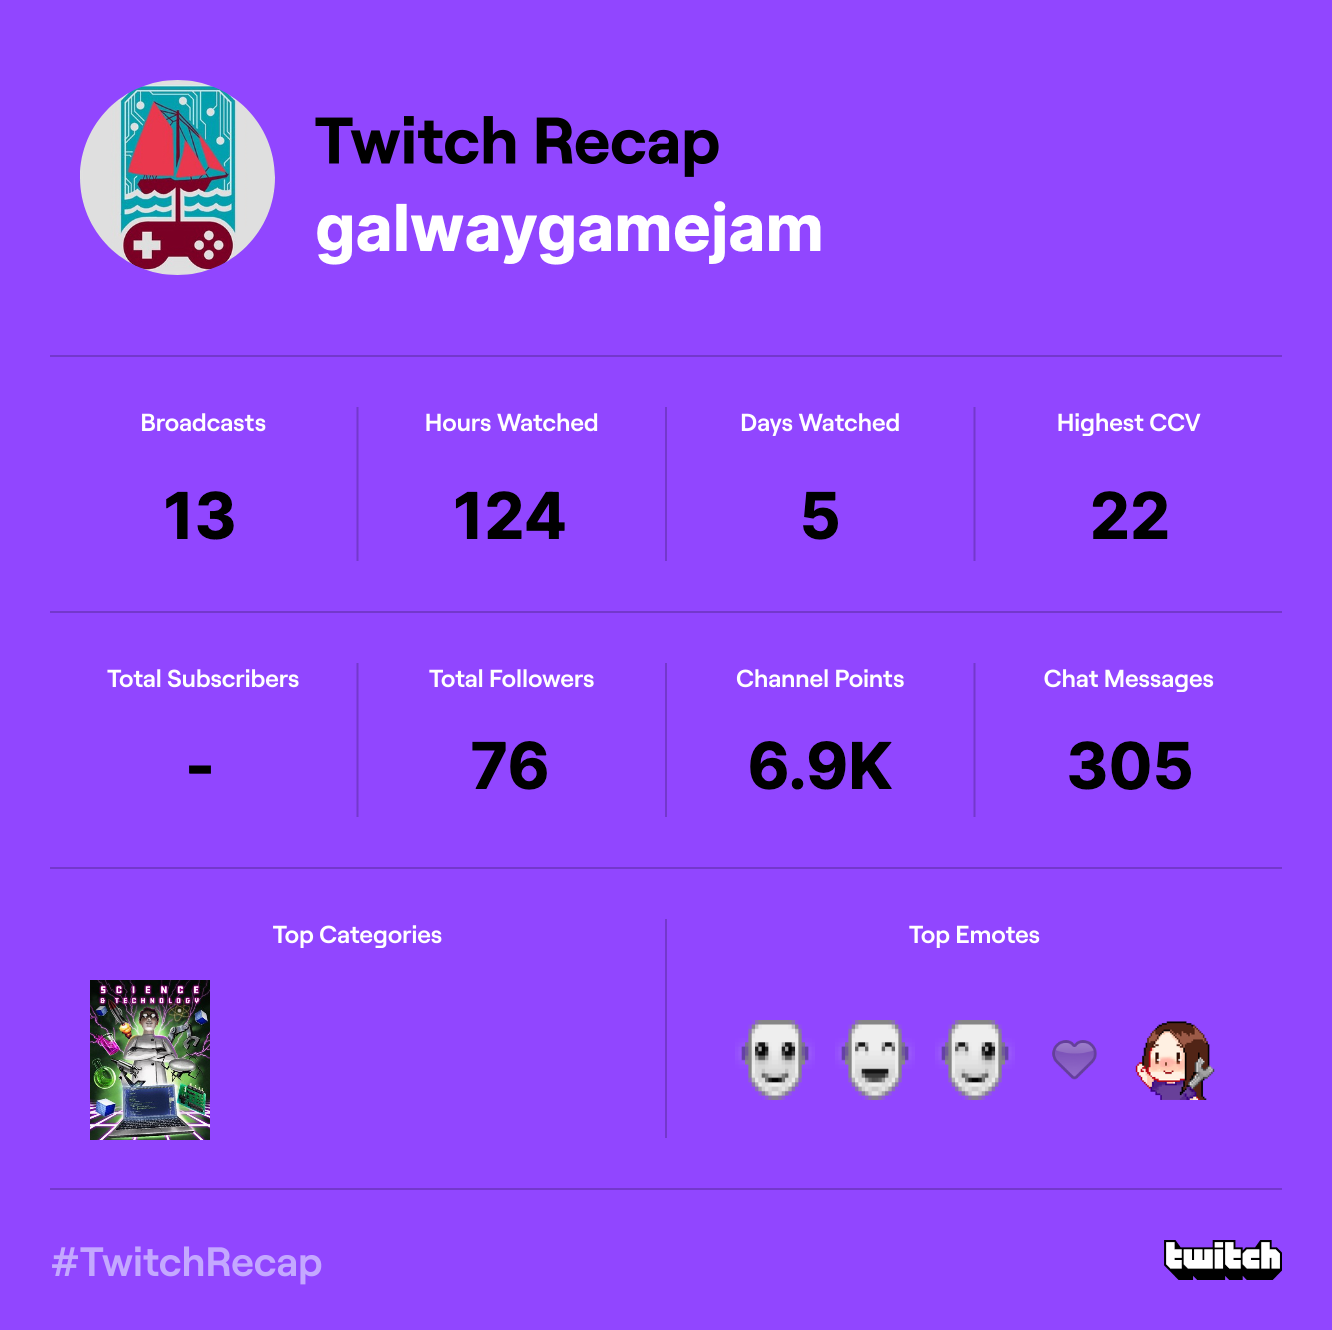 Galway Game Jam Twitch 2022 recap stats! Broadcasts: 13 Hours Watched: 124 Days Watched: 5 Highest concurrent viewers: 22 Total Followers: 76 Channel Points: 6.9k [I have no idea what this means and don't really care tbh!] Chat Messages: 305 Top Categories: Science & Technology